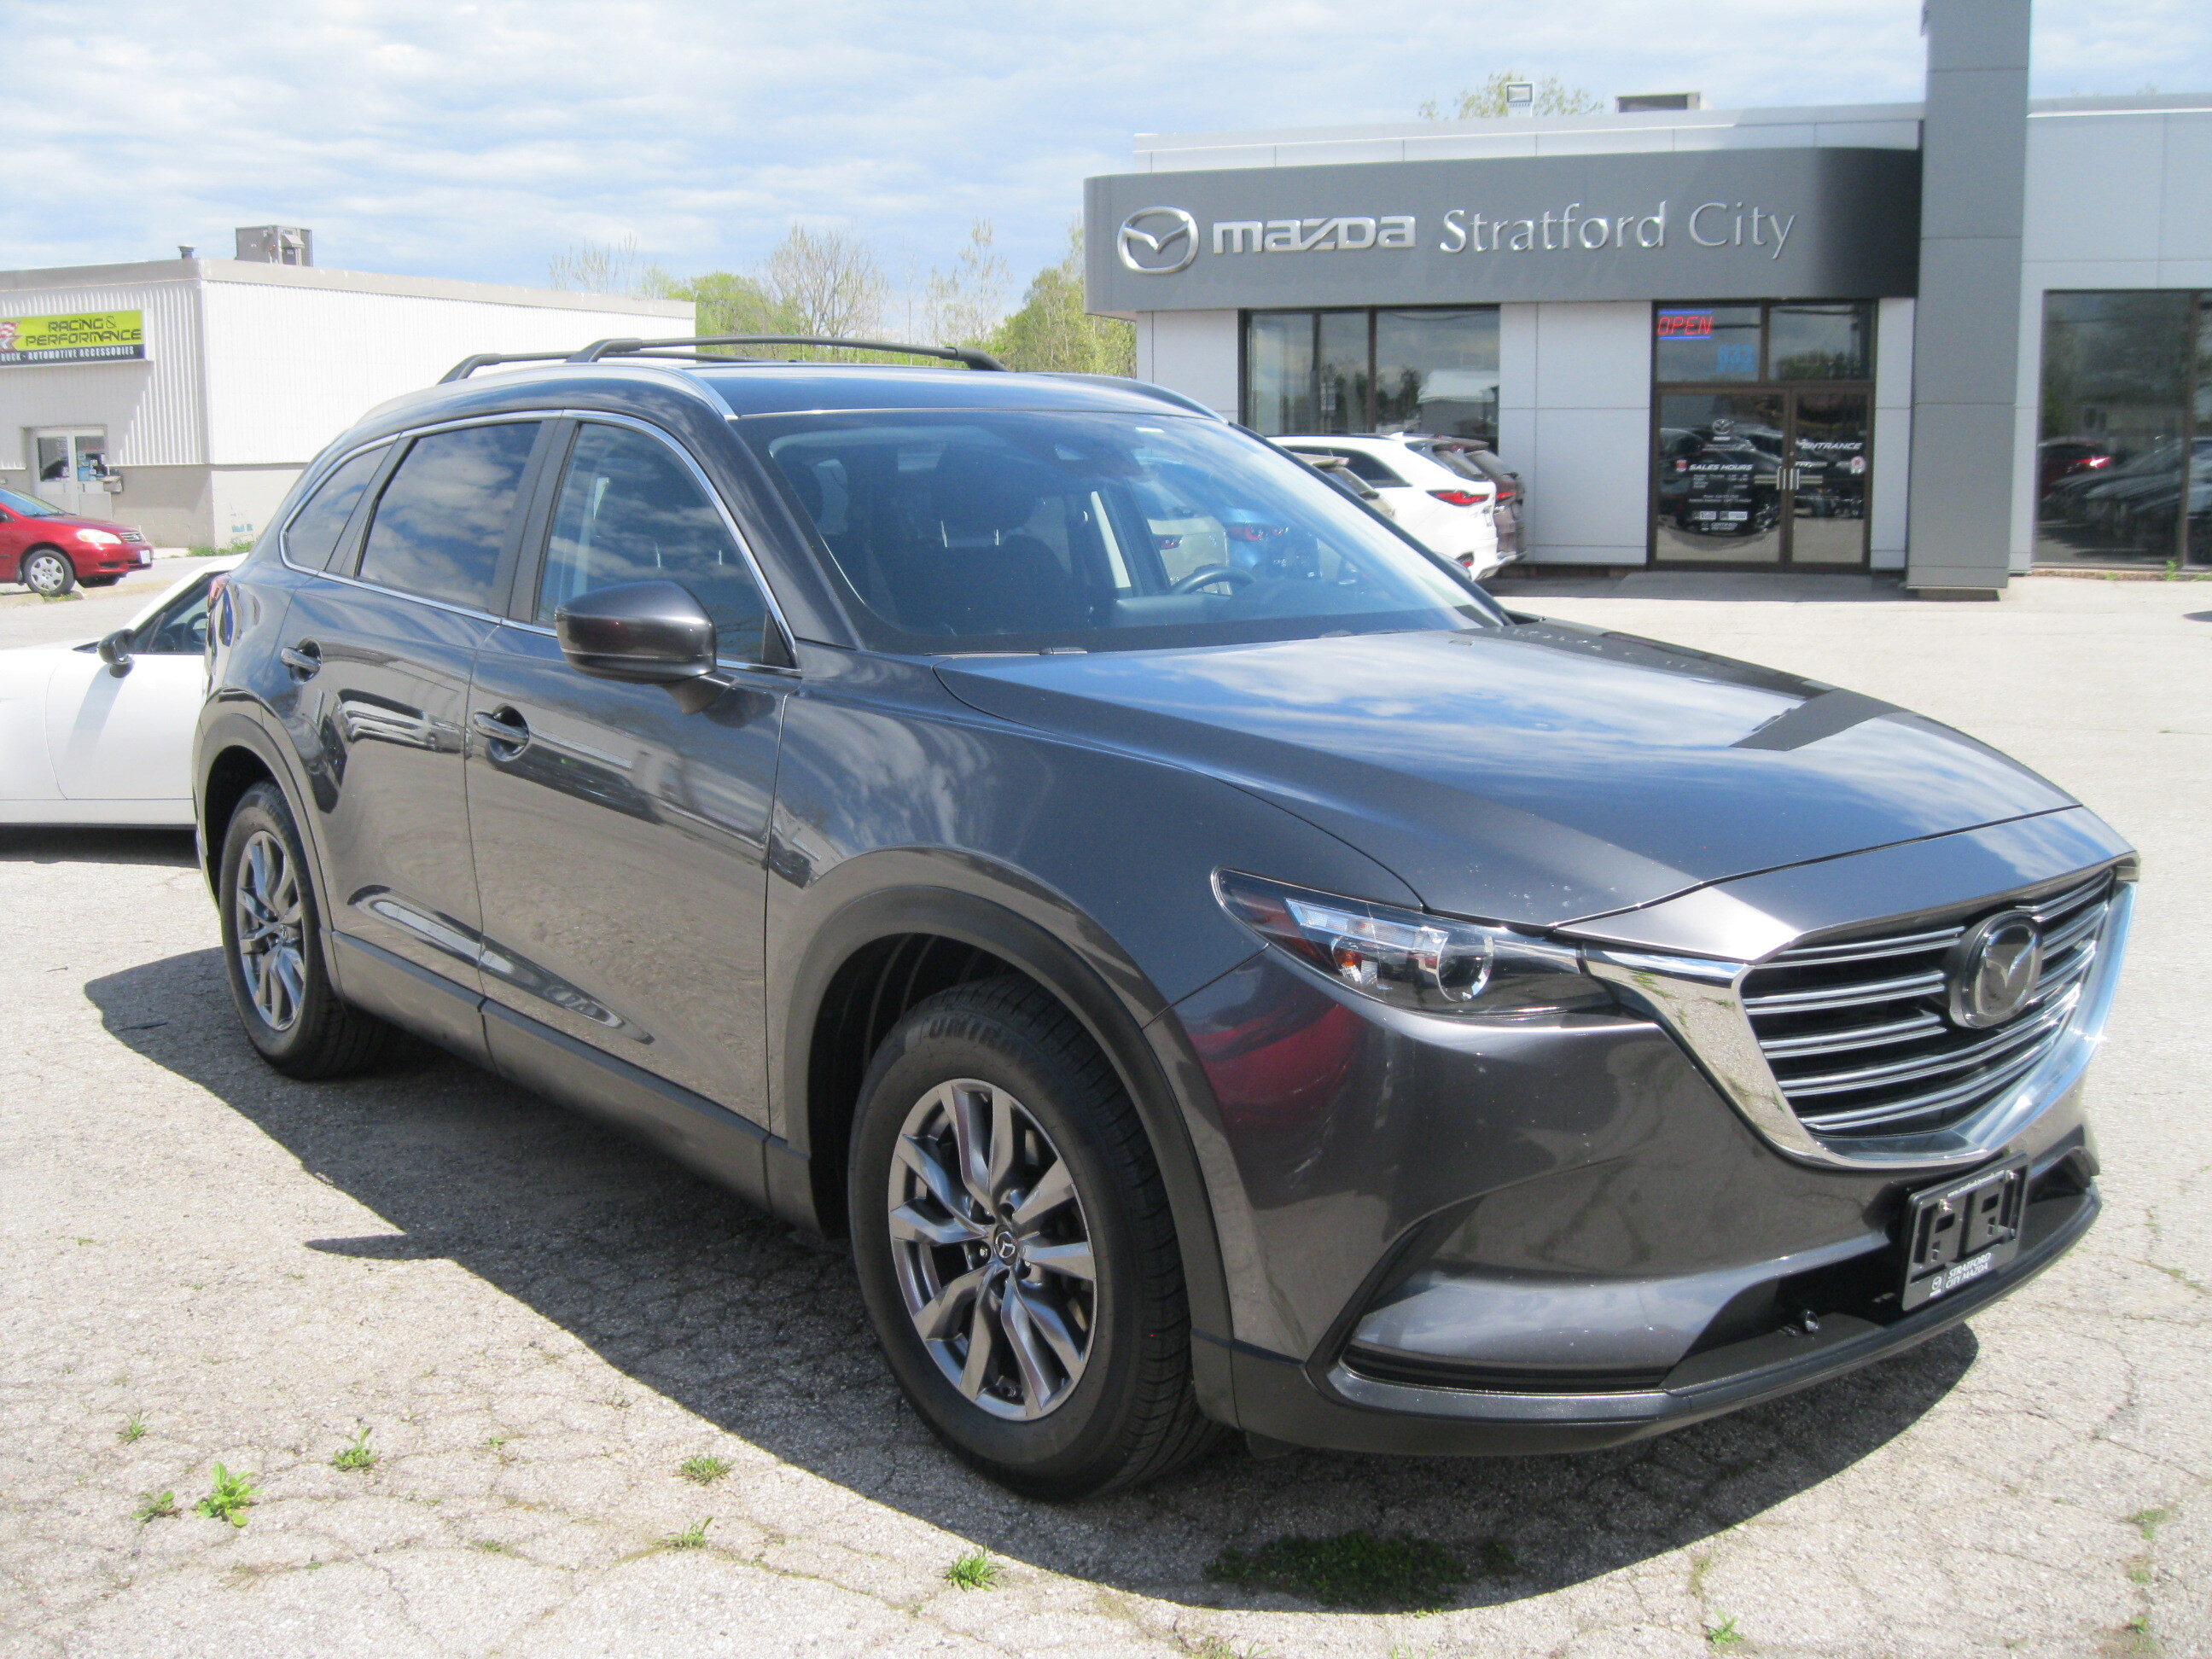 2019 Mazda CX-9 2019 MAZDA CX 9 GS AWD  ONE OWNER! NO ACCIDENTS!!